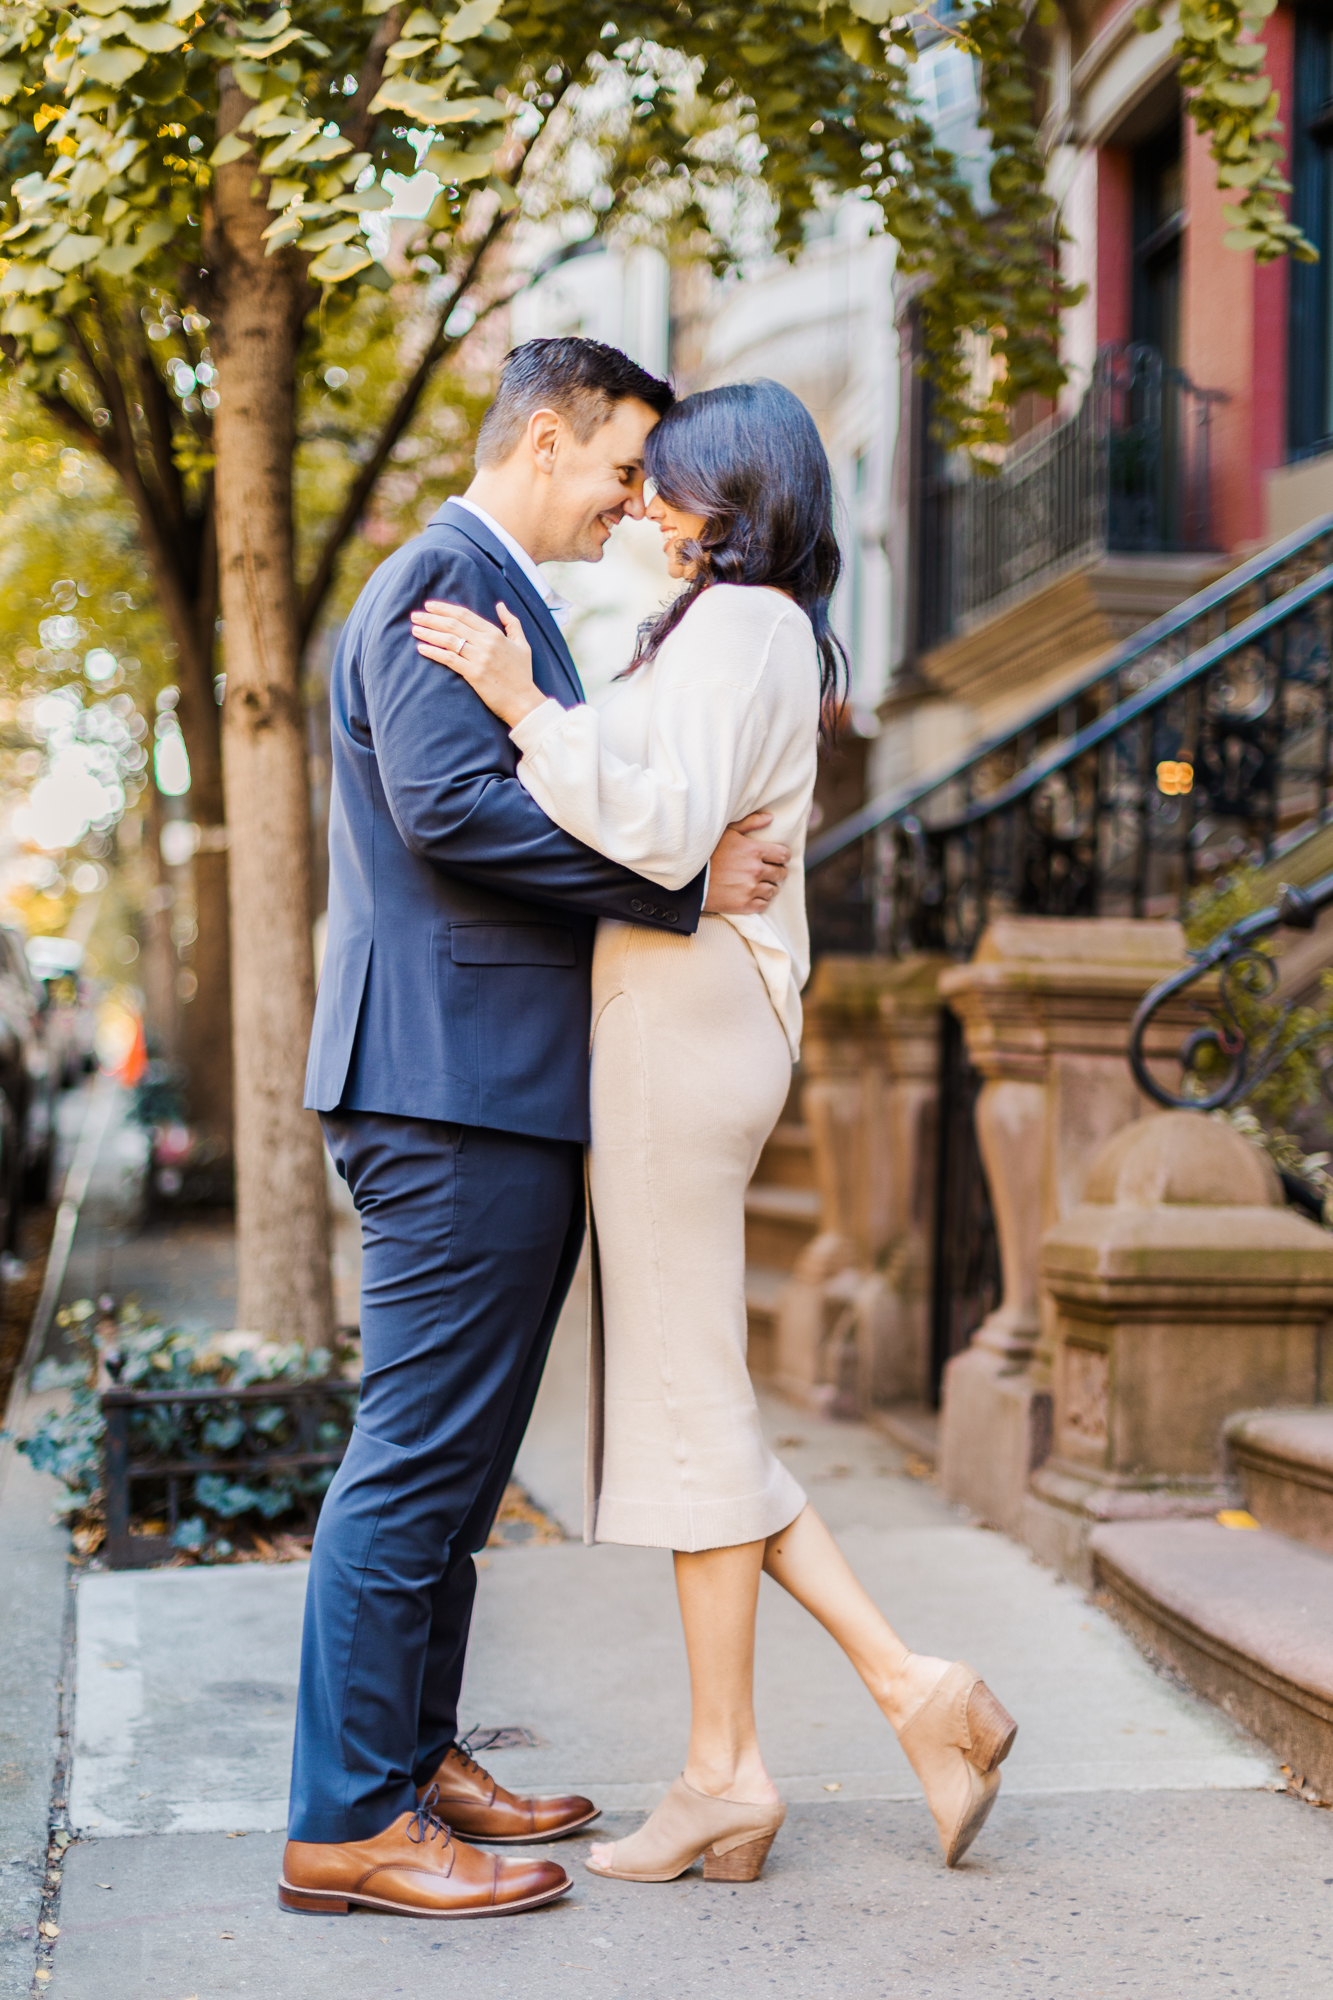 Charming Upper West Side Engagement Photo Shoot in NYC